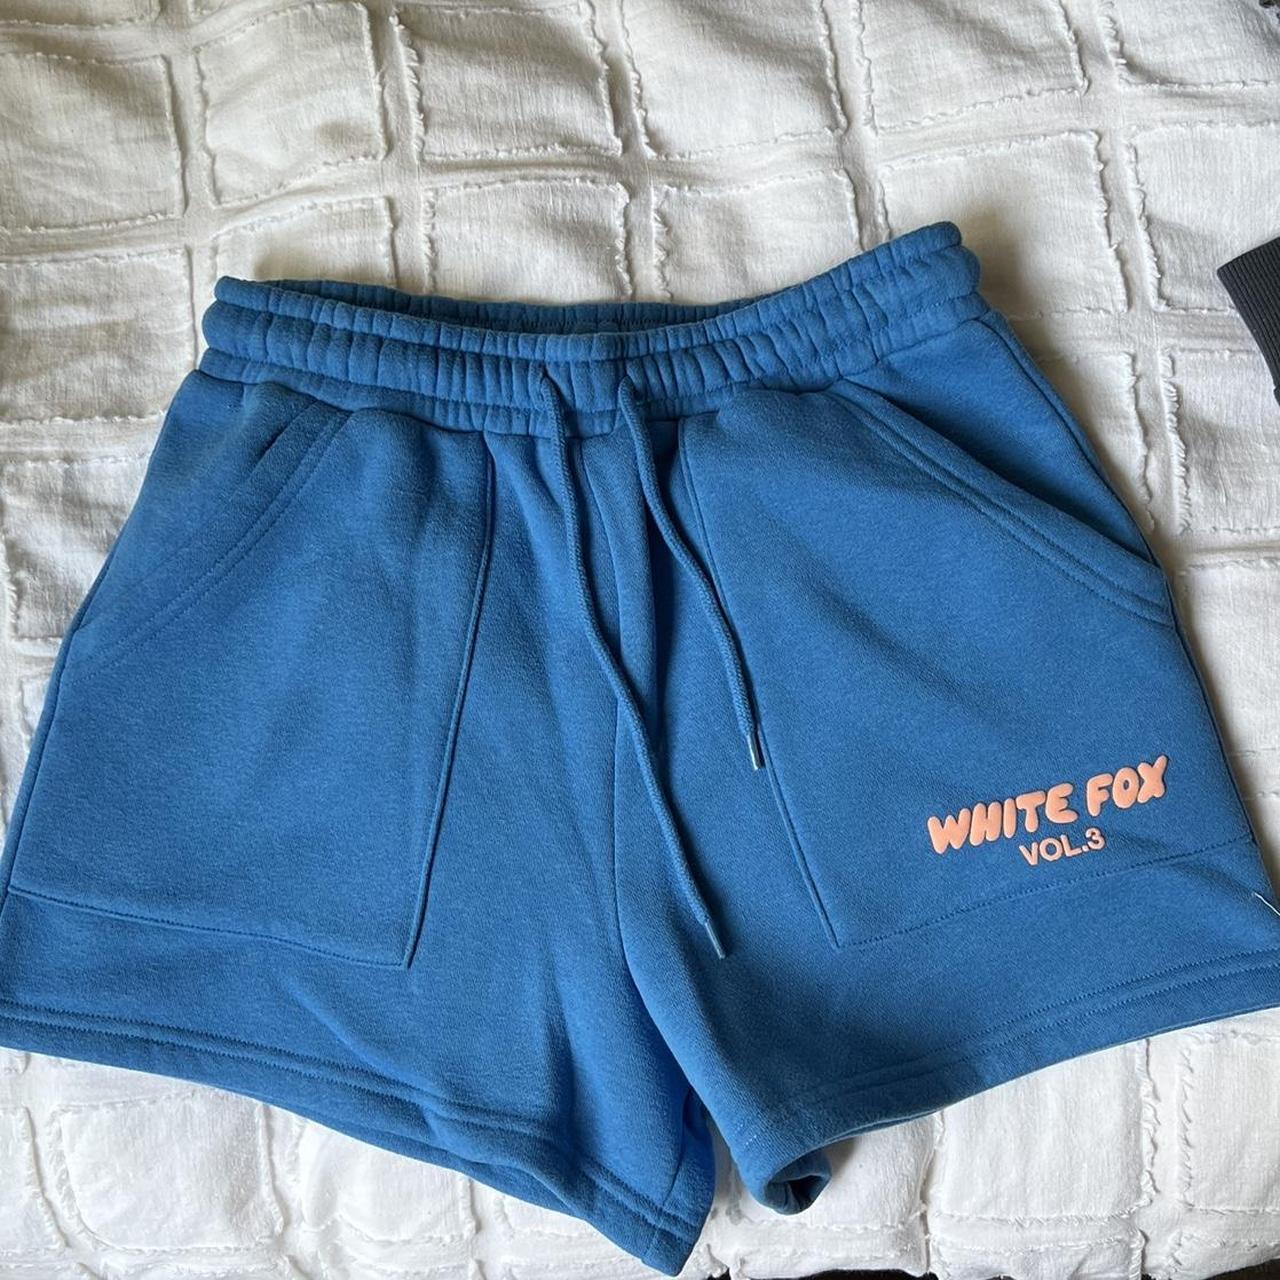 Selling white fox shorts Never worn but no tag - Depop